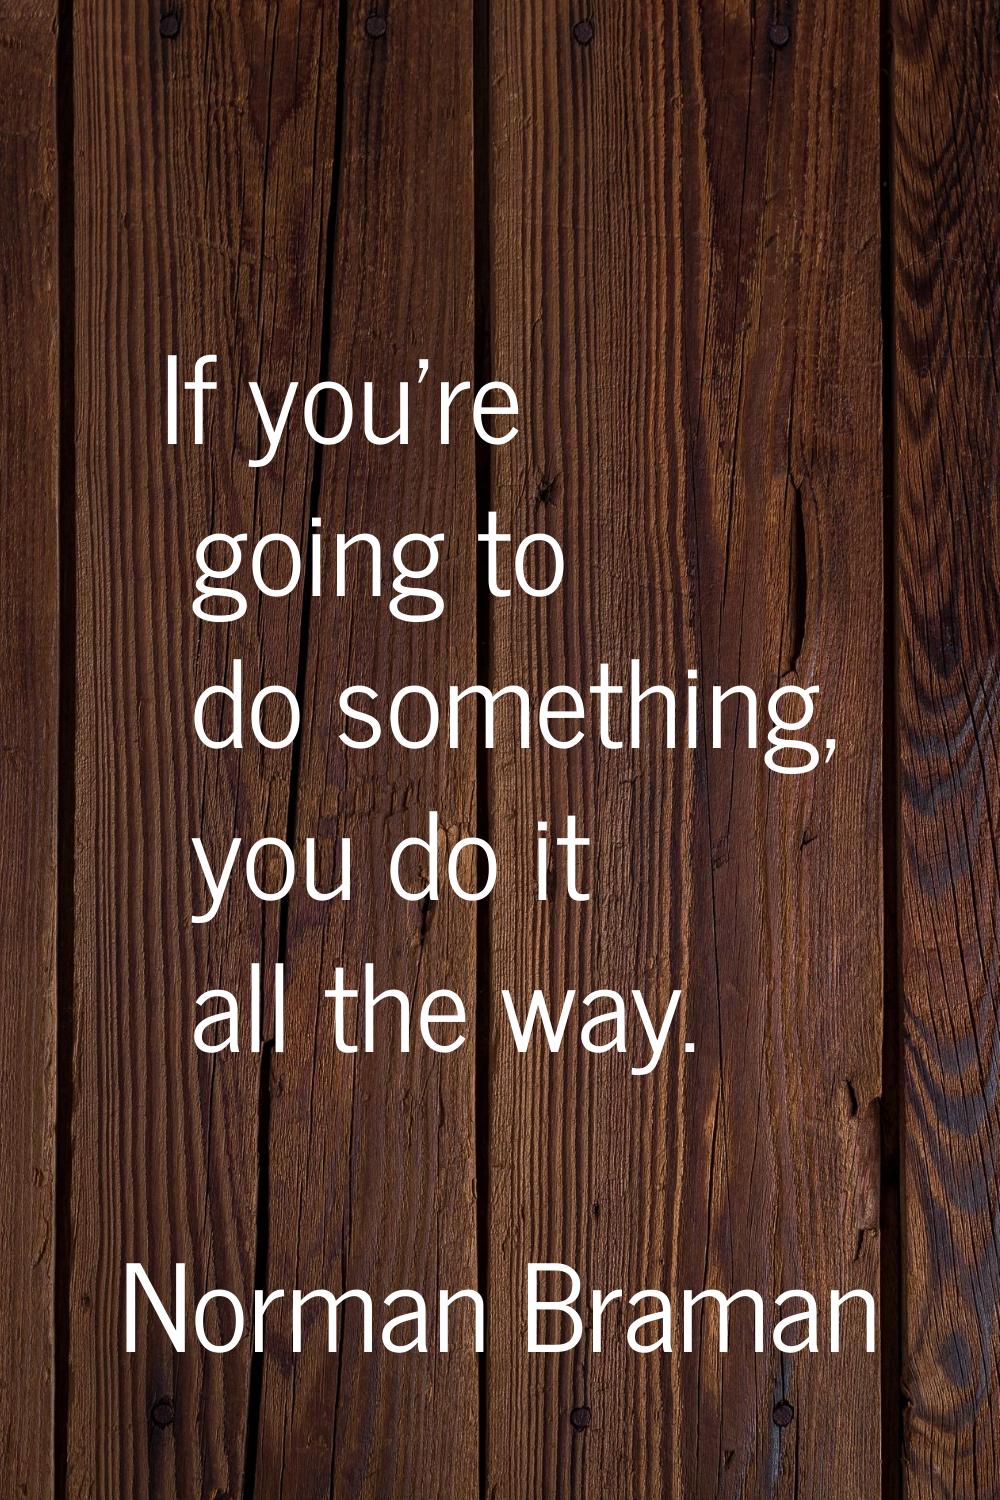 If you're going to do something, you do it all the way.